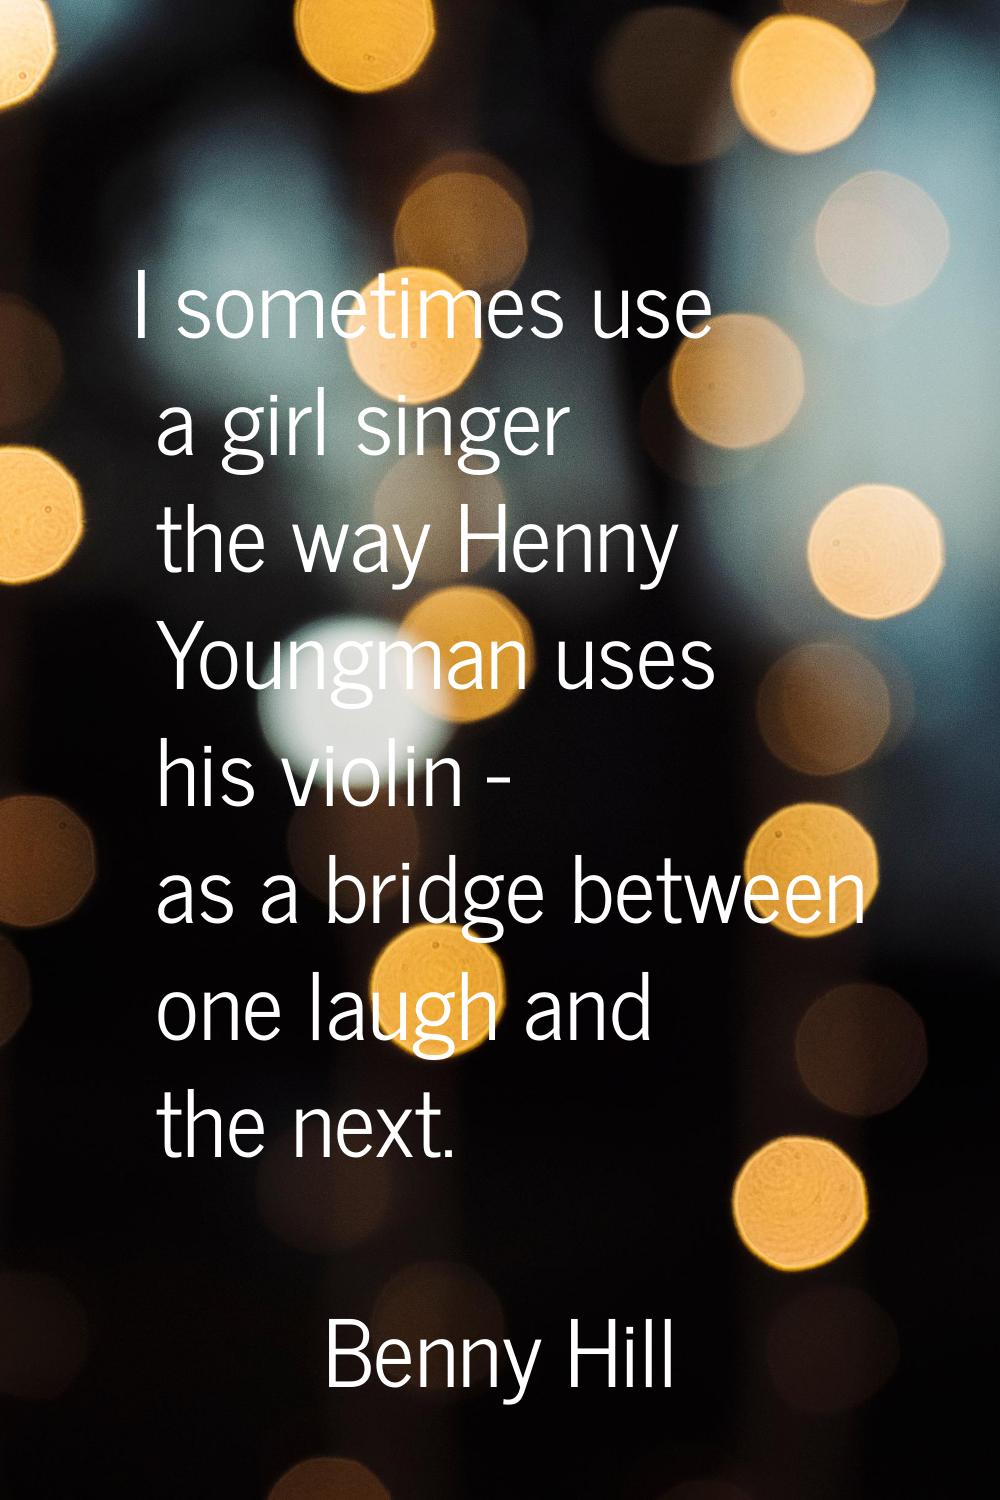 I sometimes use a girl singer the way Henny Youngman uses his violin - as a bridge between one laug